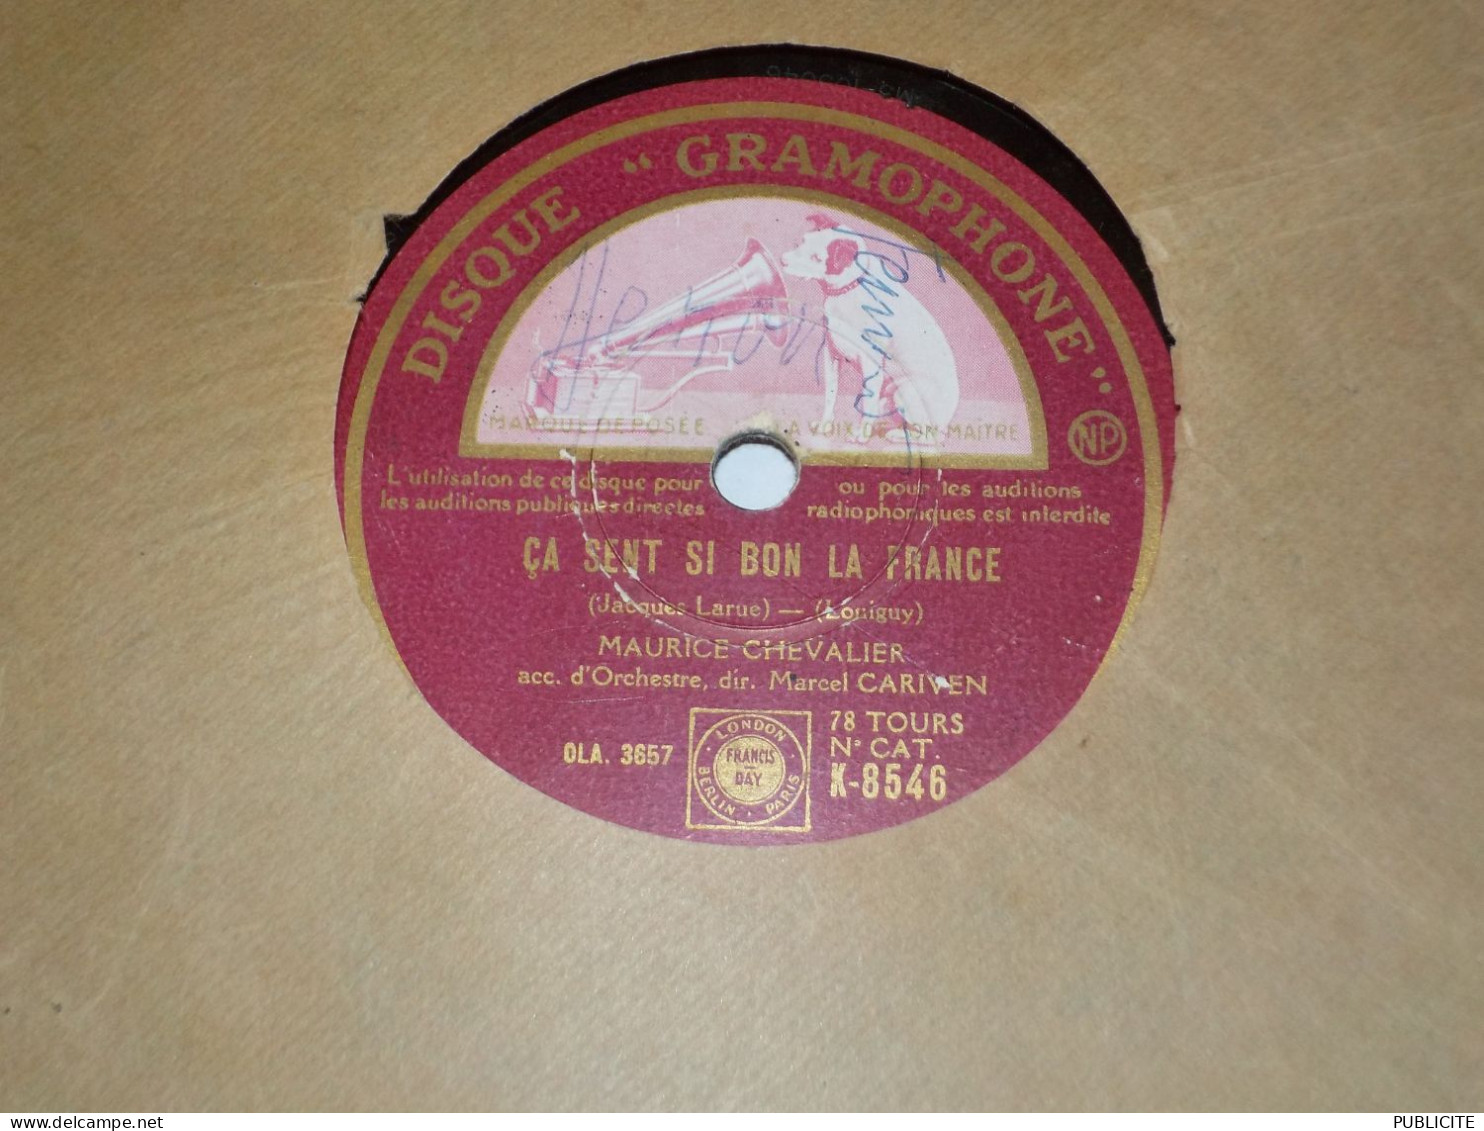 DISQUE 78 TOURS MAURICE CHEVALIER 1941 - 78 Rpm - Gramophone Records